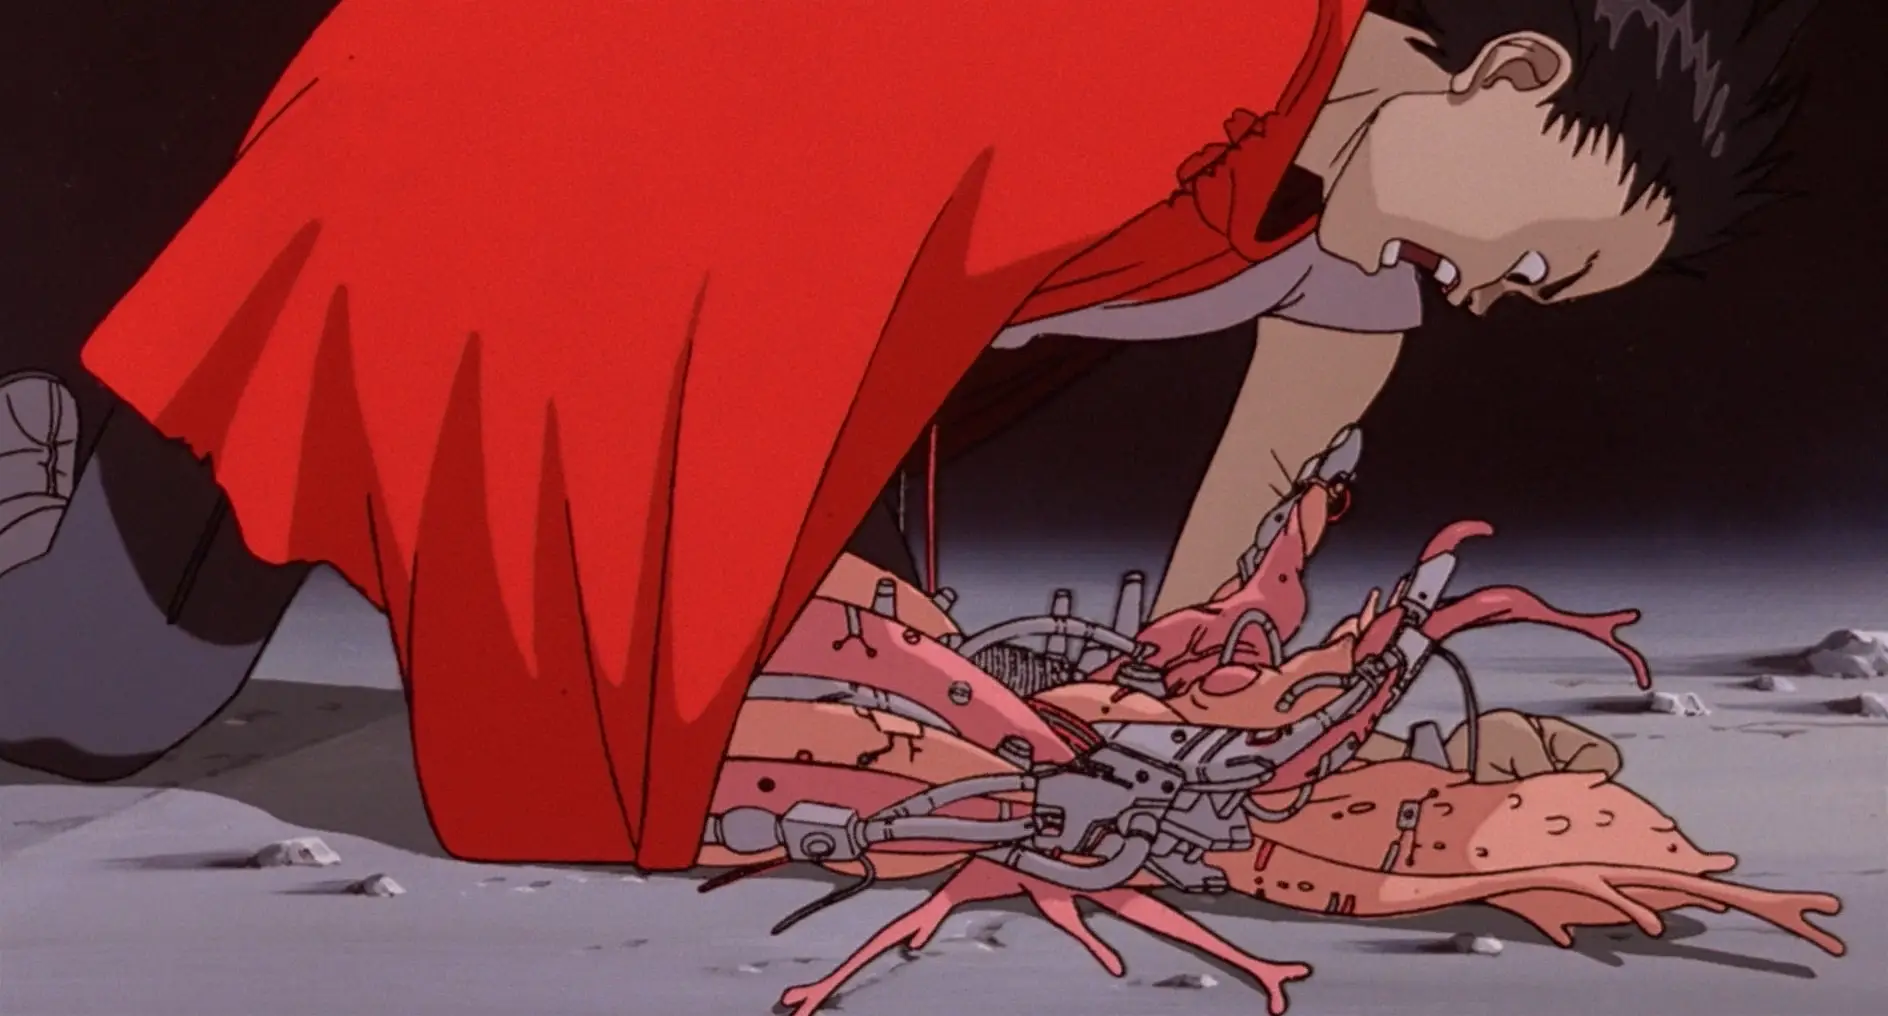 Still from Akira. Tetsuo has collapsed on the floor and his robot arm has turned into a mass of flesh mixed in with robotic elements.